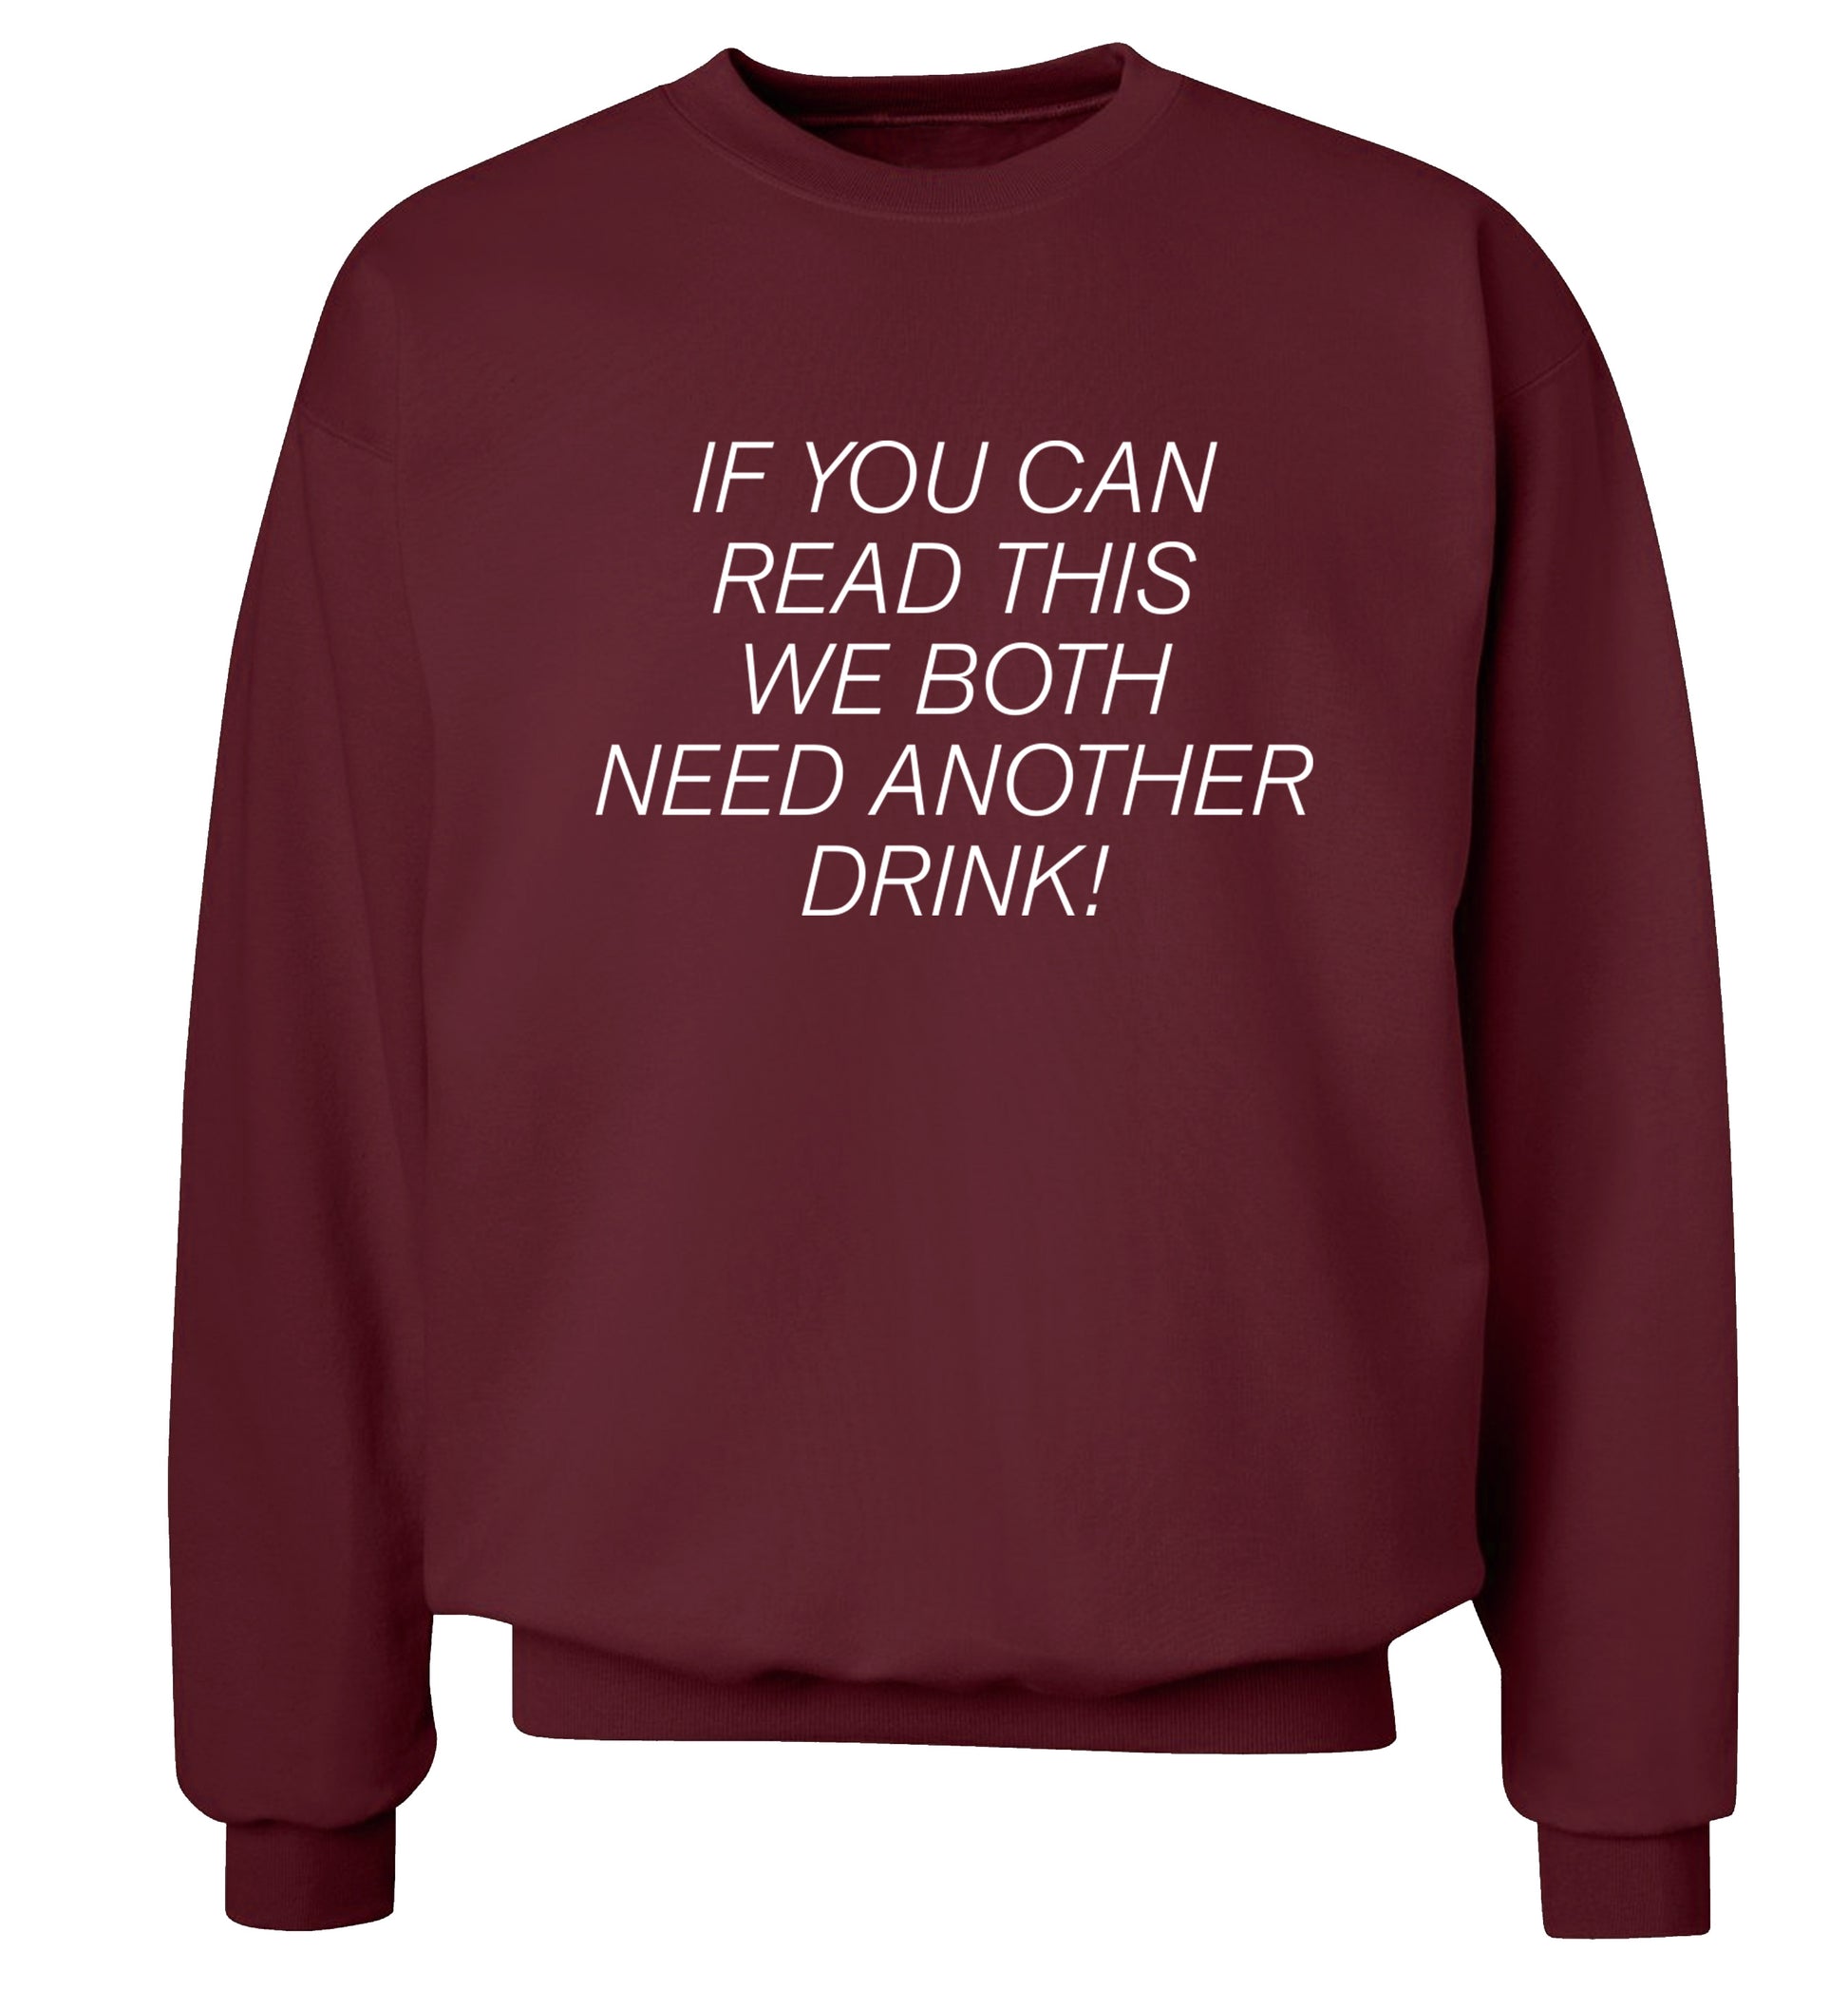 If you can read this we both need another drink! Adult's unisex maroon Sweater 2XL